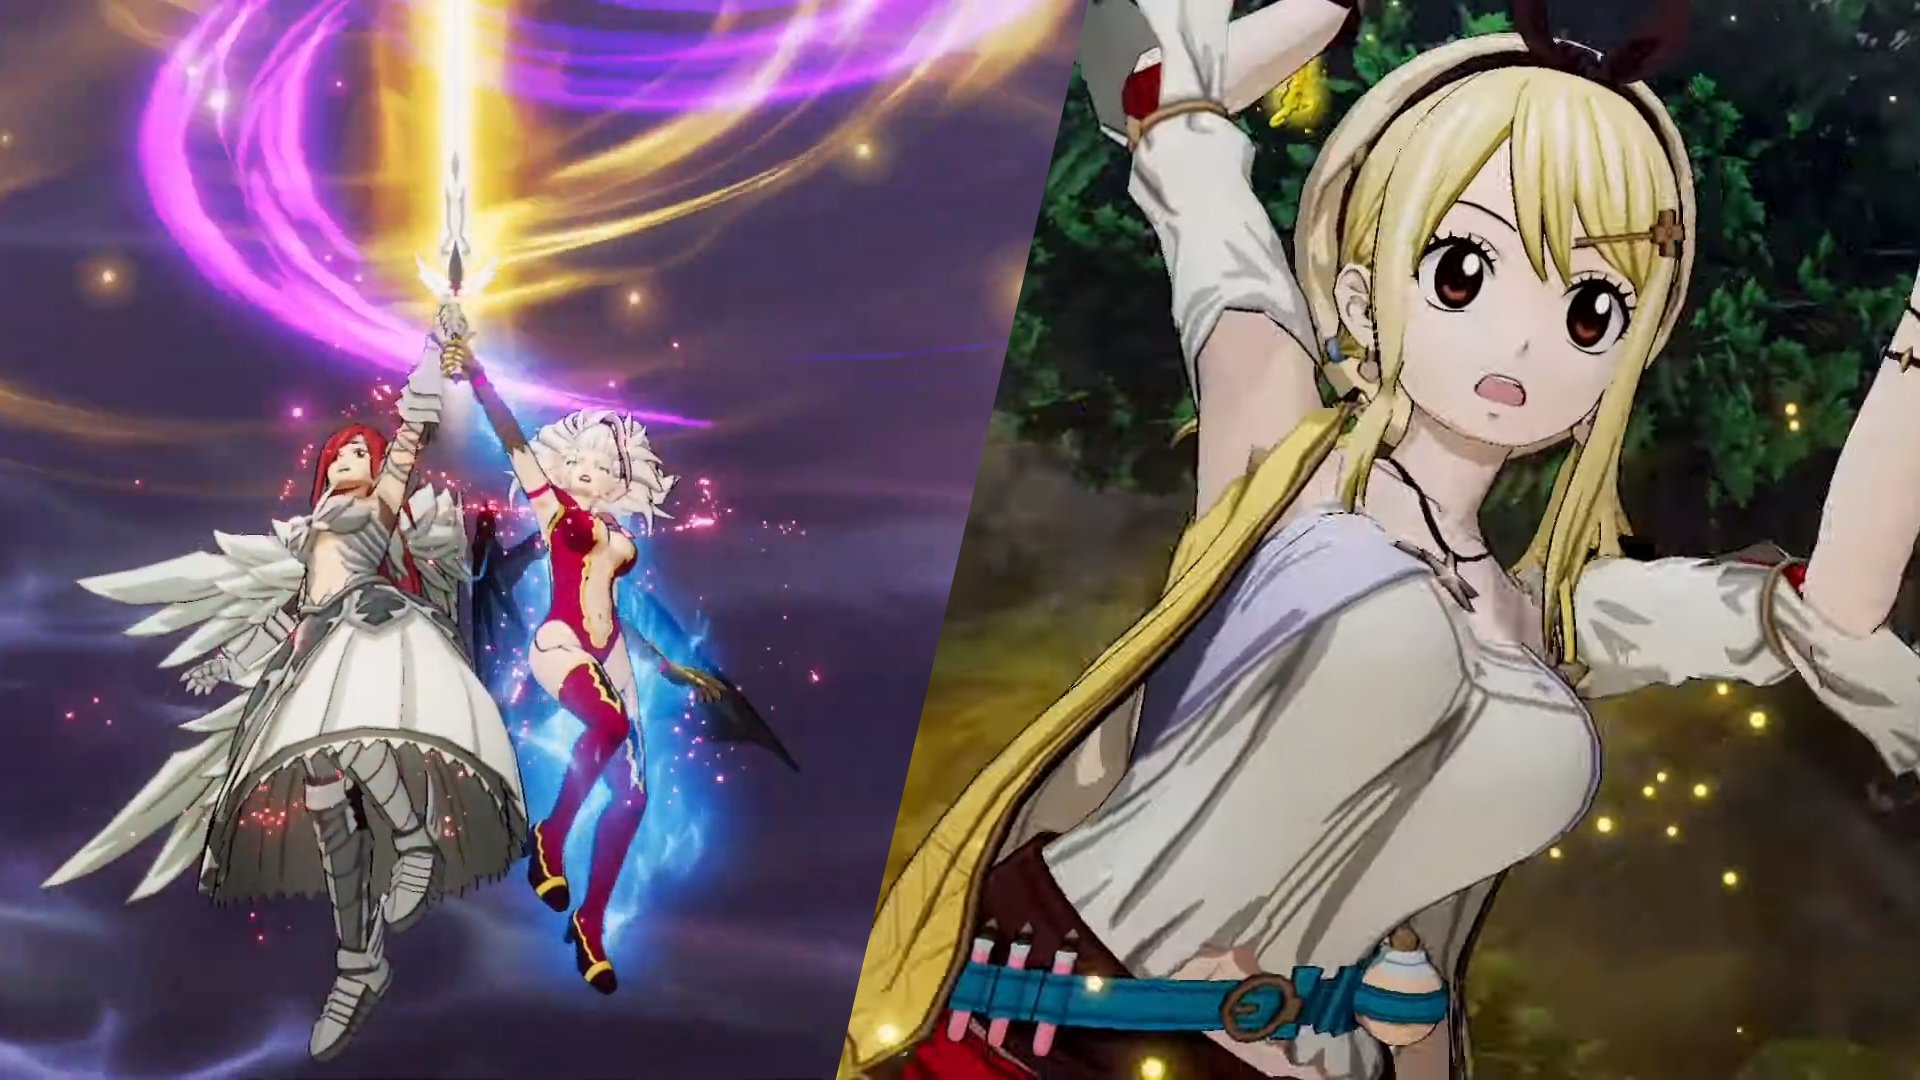 Fairy Tail Introduces Powerful Unison Raids And Its Deluxe Edition Costumes In New Trailers Nintendo Wire